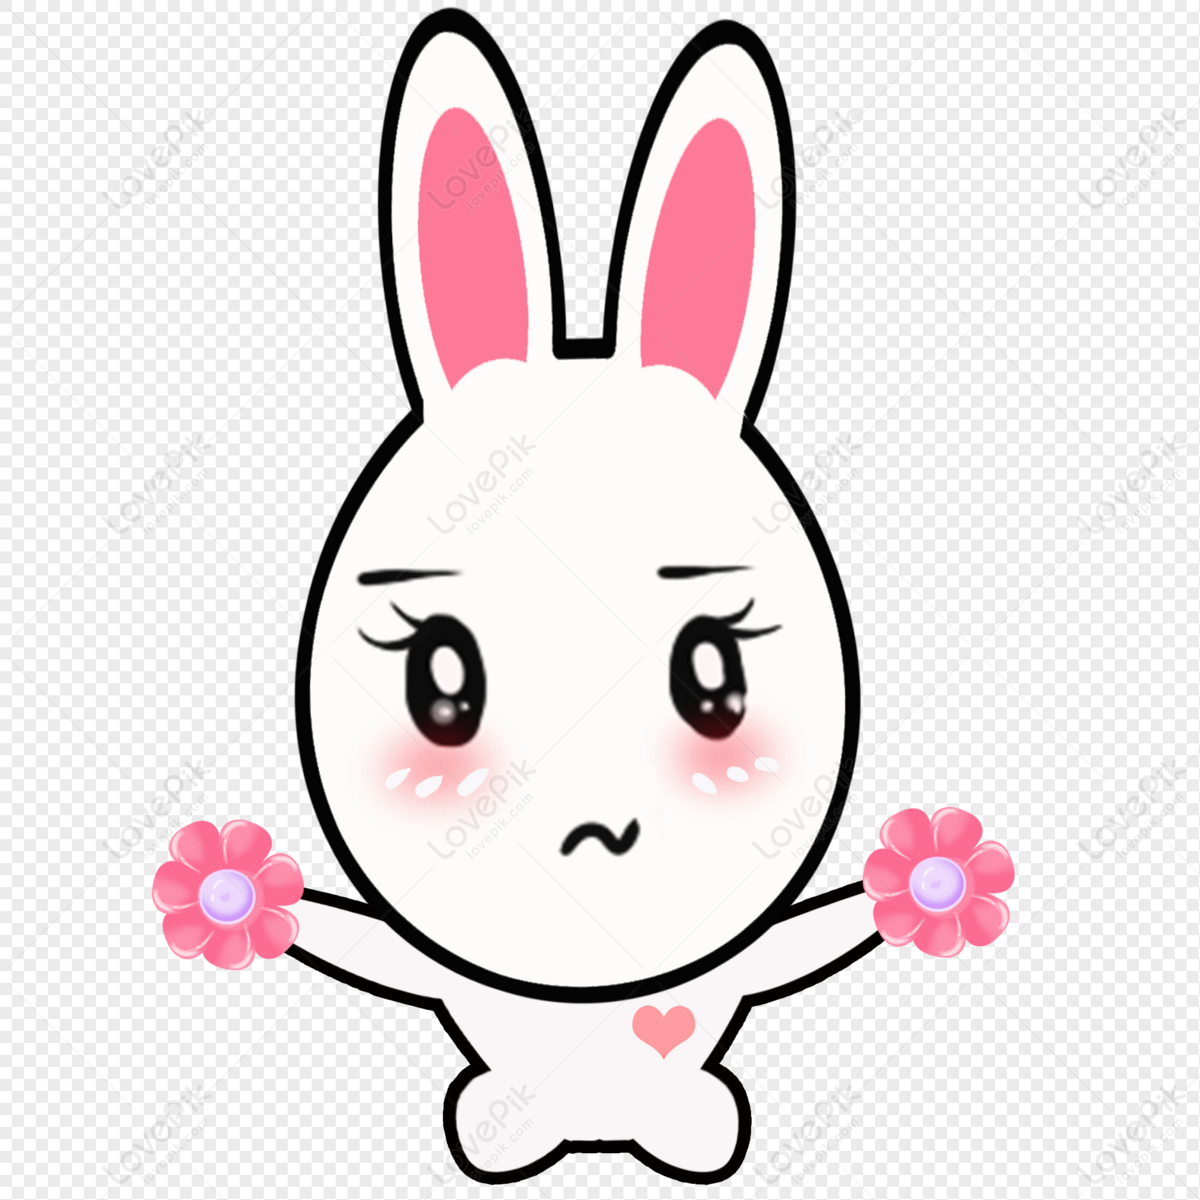 Rabbit PNG Transparent And Clipart Image For Free Download - Lovepik ...